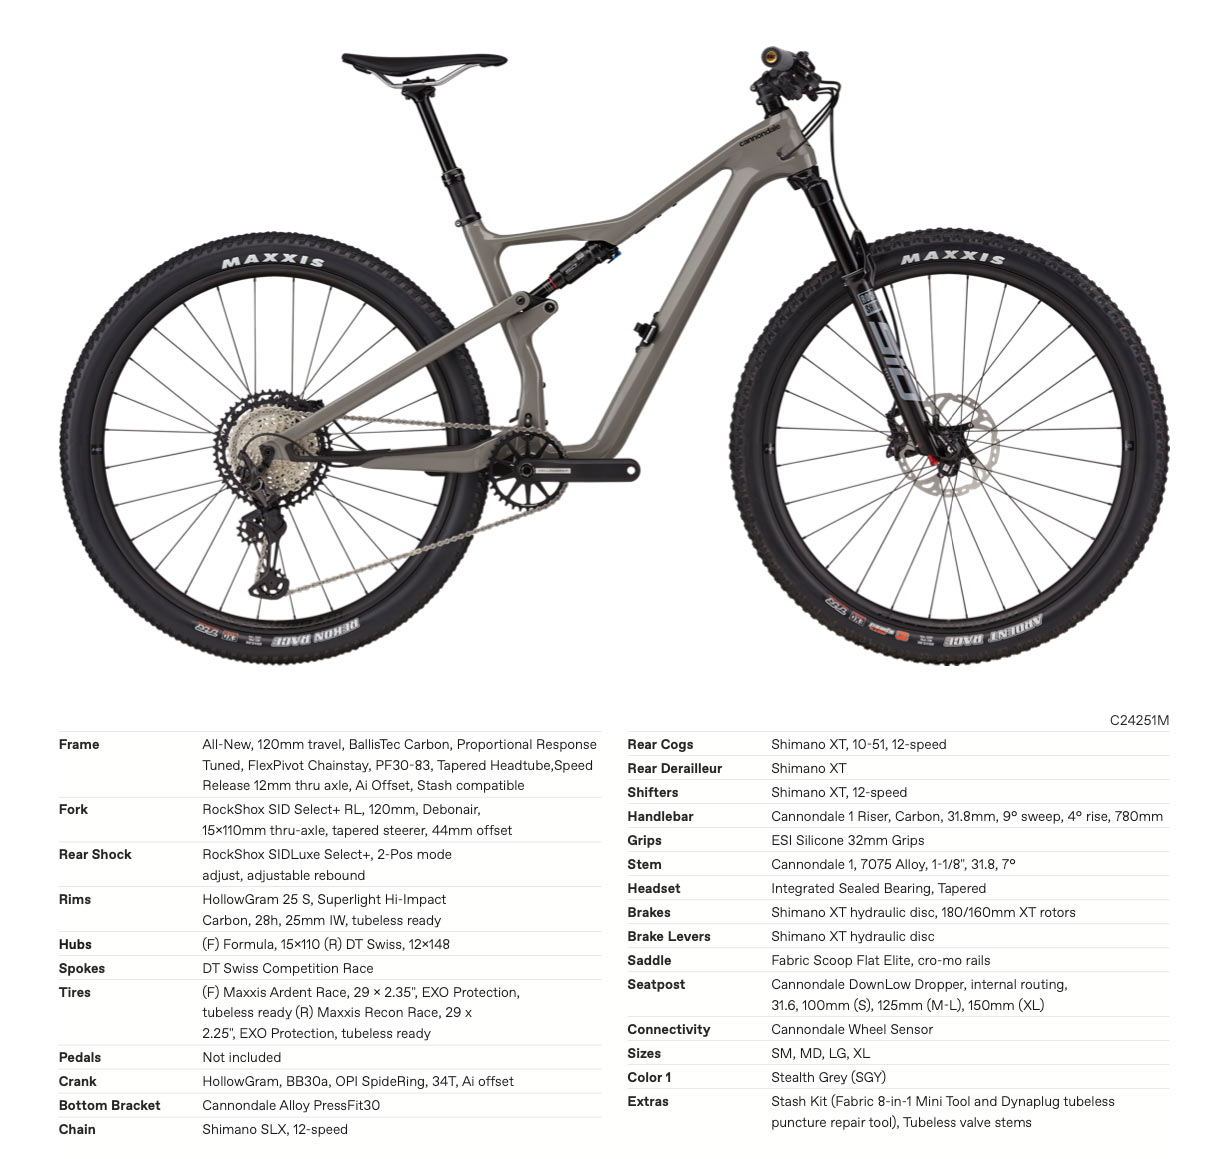 2021 Cannondale Scalpel SE 1 mountain bike specs and build components